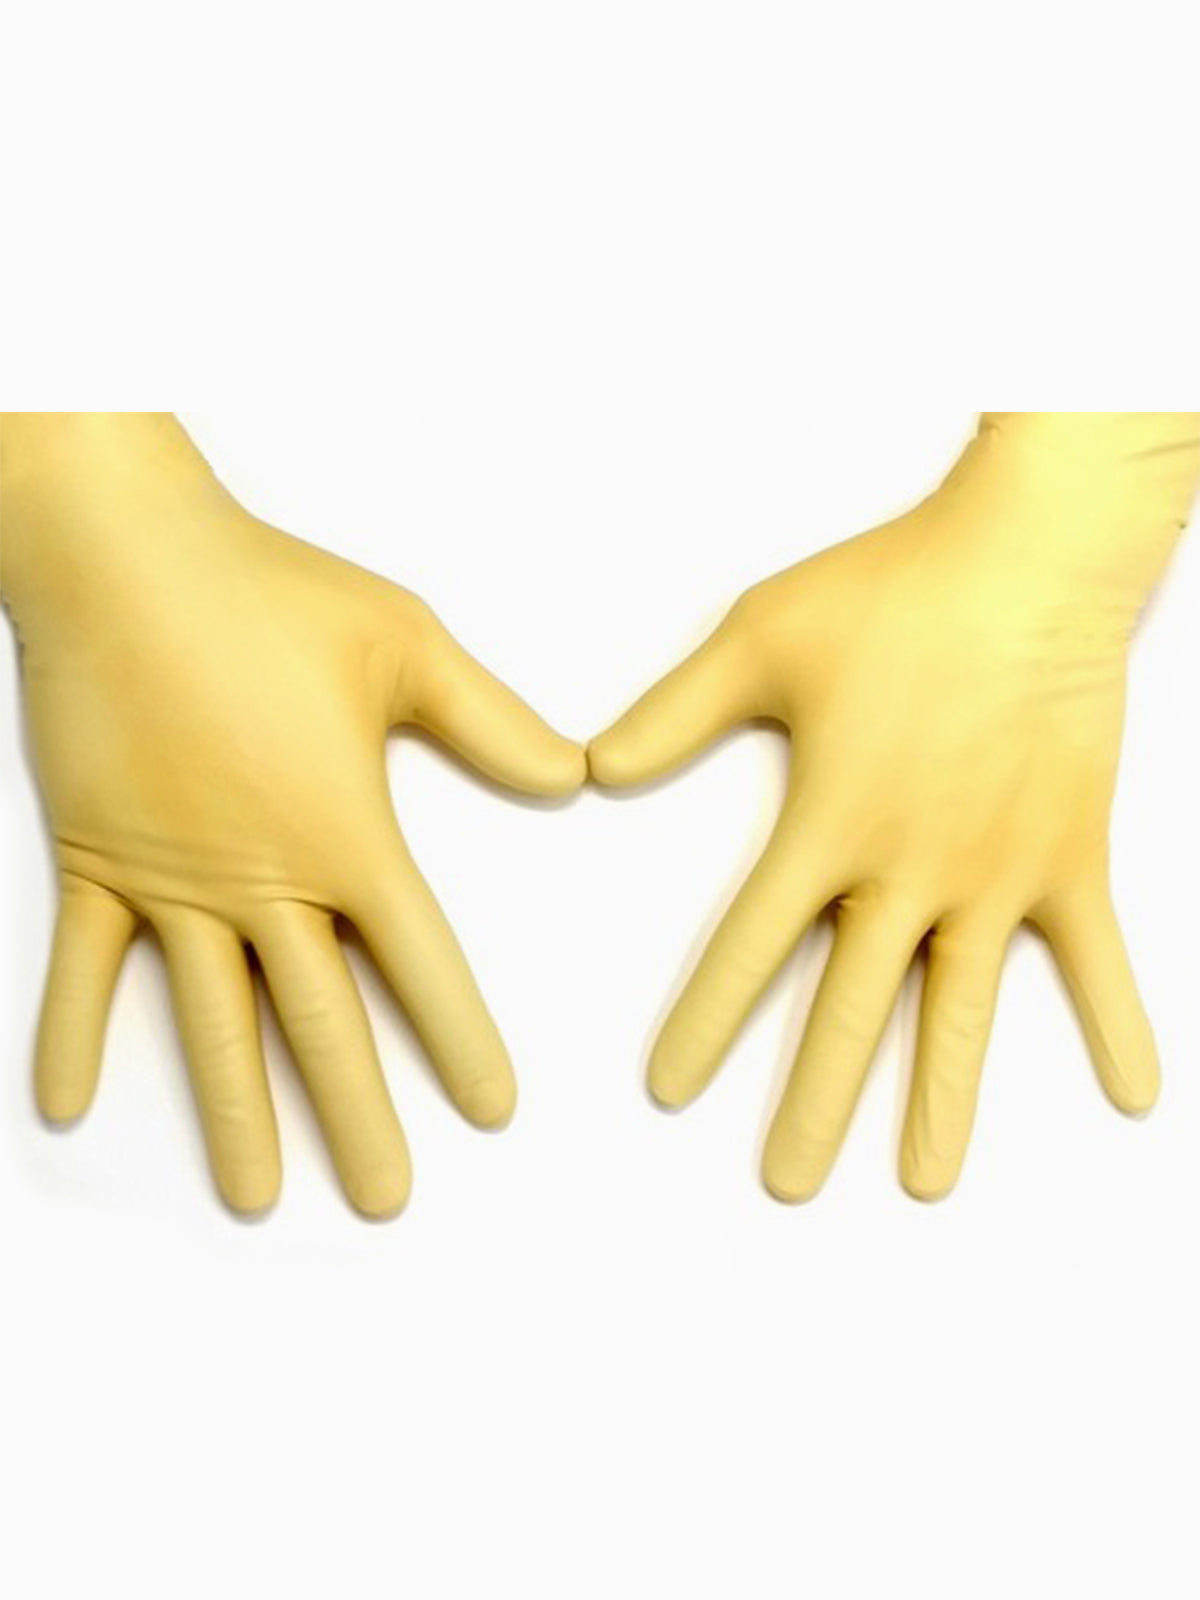 Surgical Radiation Gloves (1 pair)